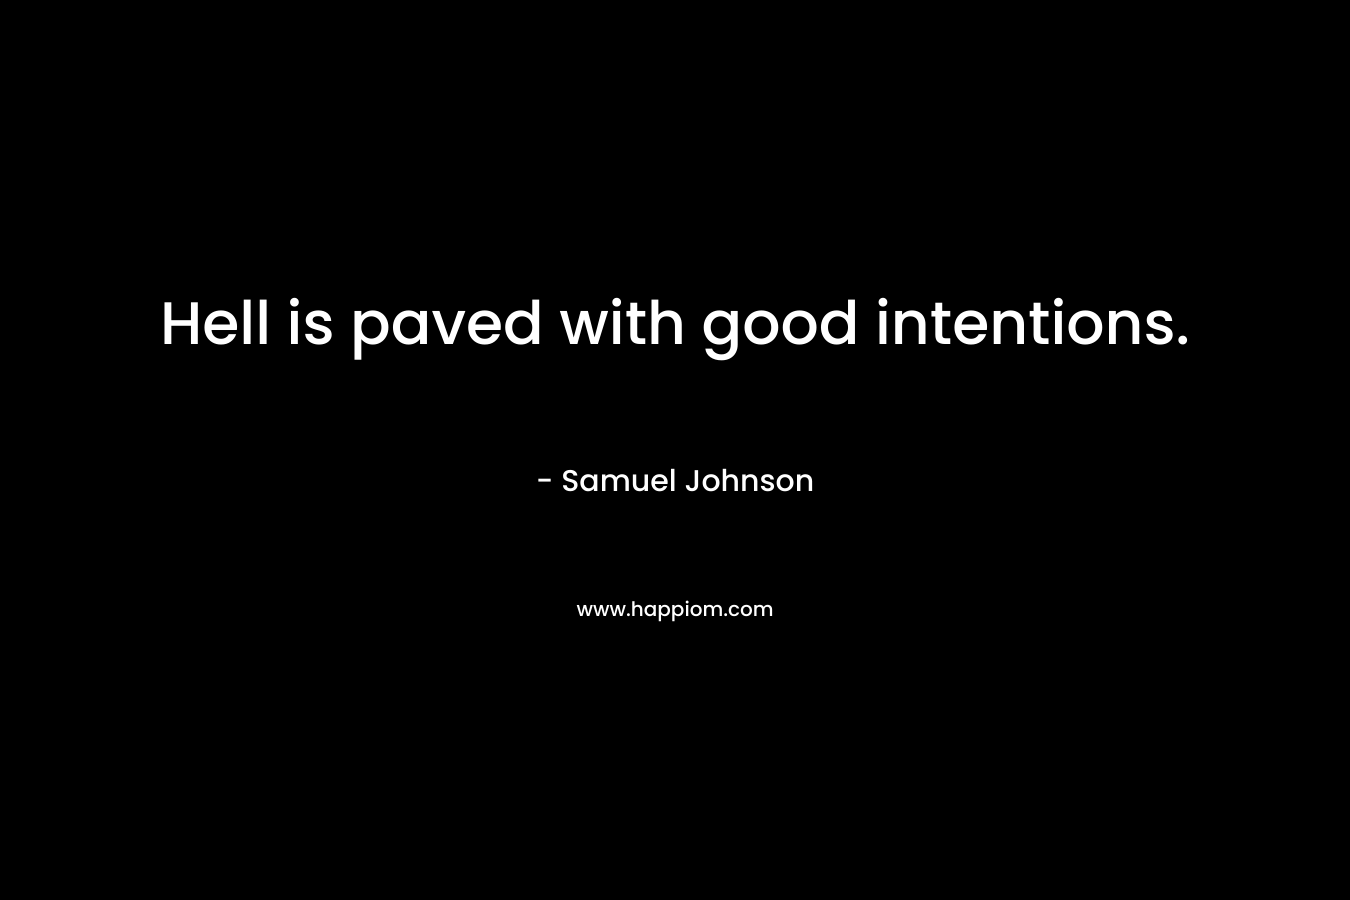 Hell is paved with good intentions.